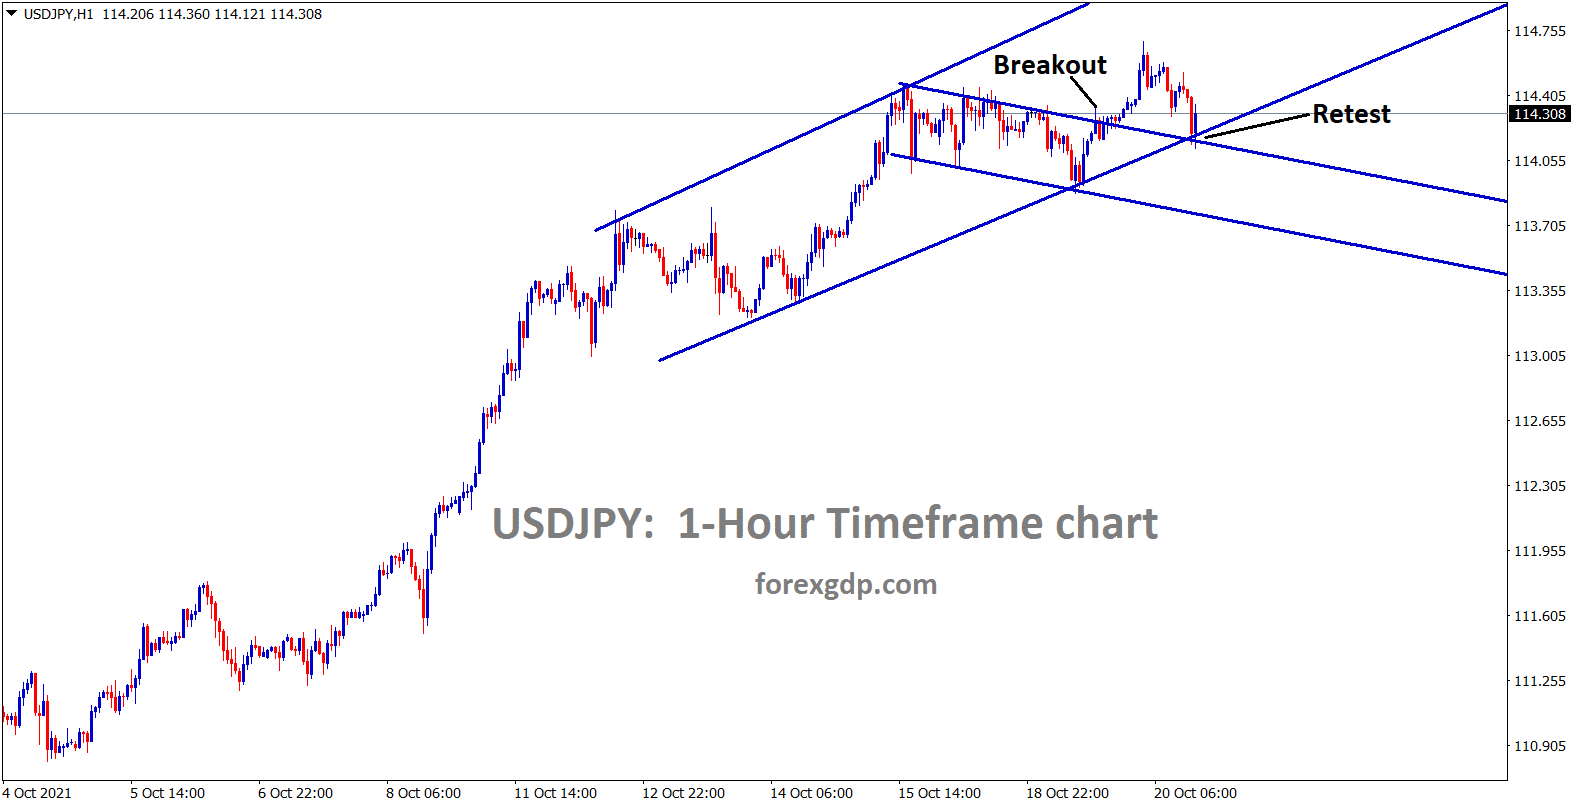 USDJPY is moving in a channel levels previous minor channel has broken and retesting